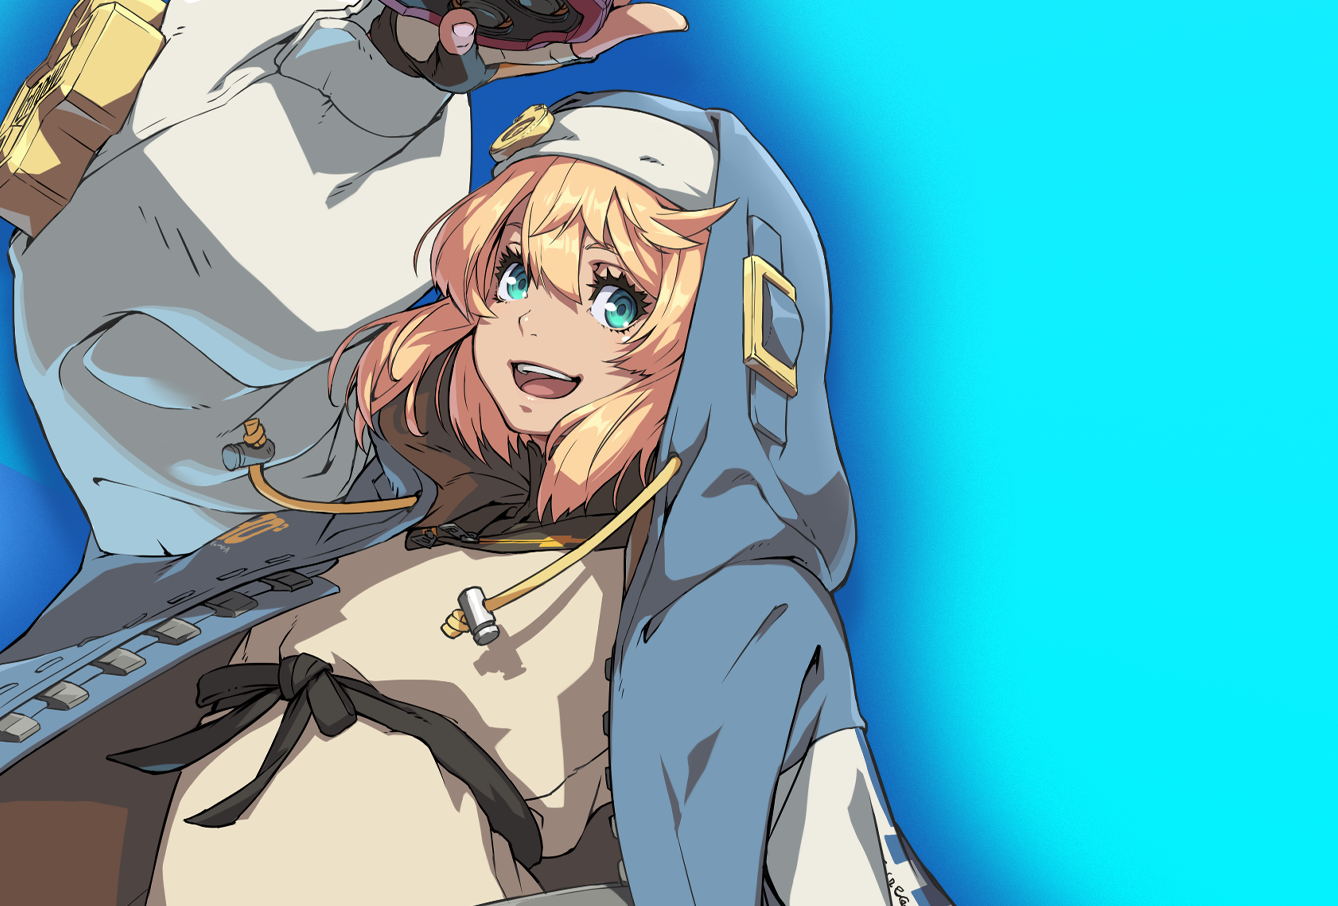 Epic Bridget Merch for Guilty Gear -Strive- Now Available in Q3